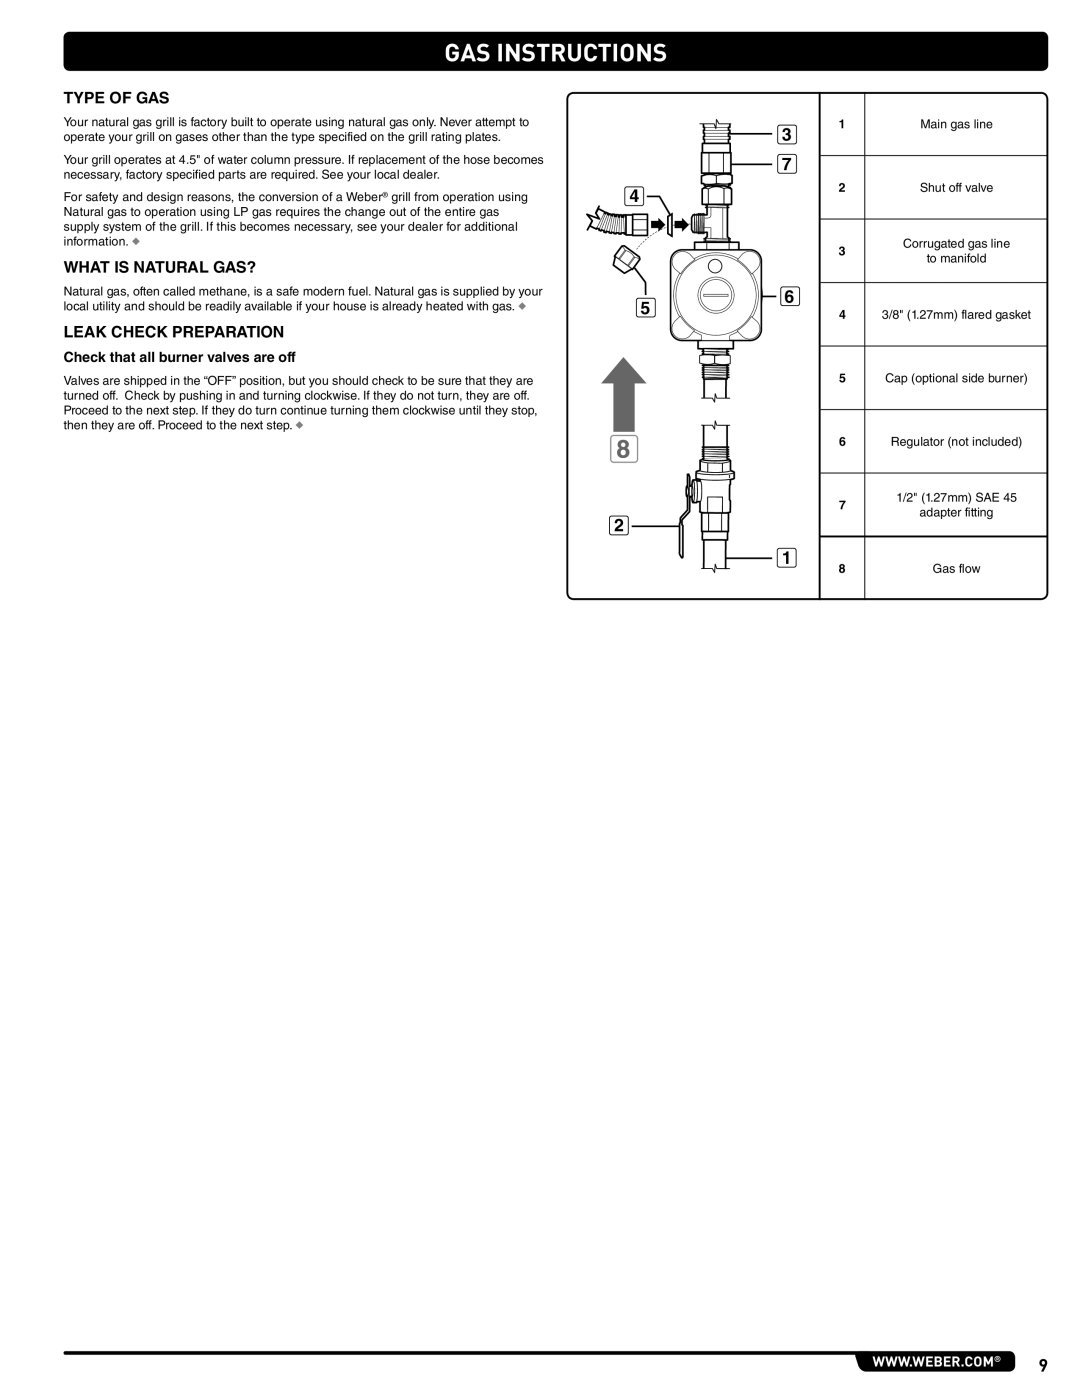 Weber 56576, Summit Gas Grill manual Gas Instructions, Type Of Gas, What Is Natural Gas?, Leak Check Preparation 